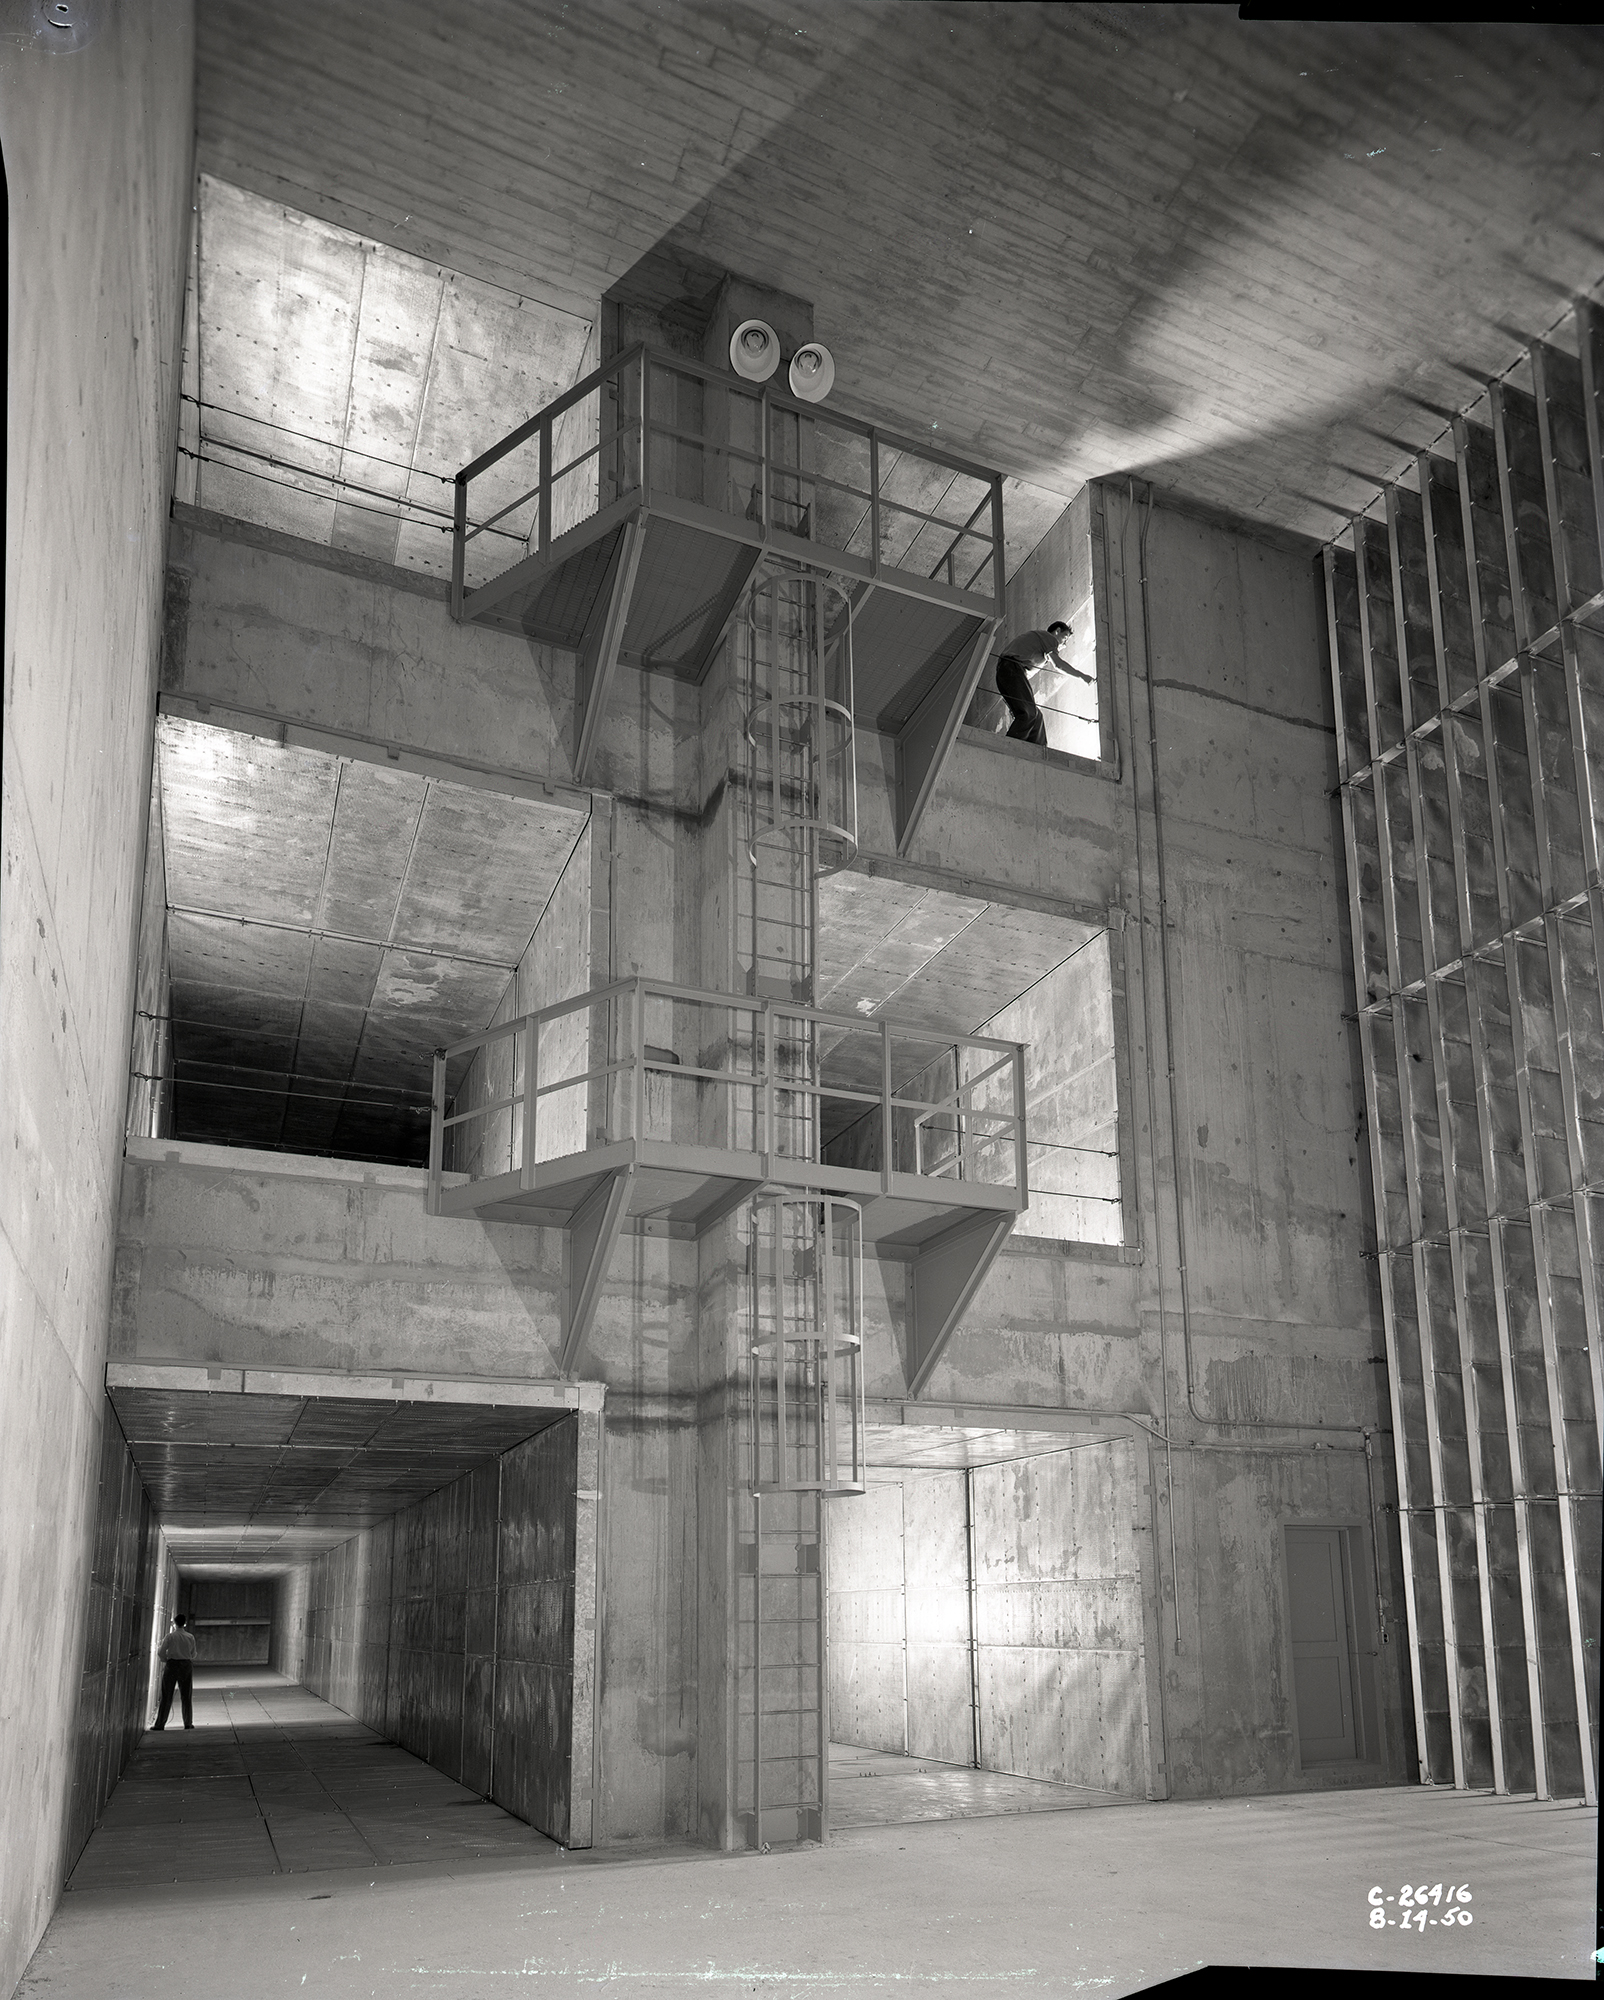 Workers stand inside wind tunnel openings at three vertical levels.